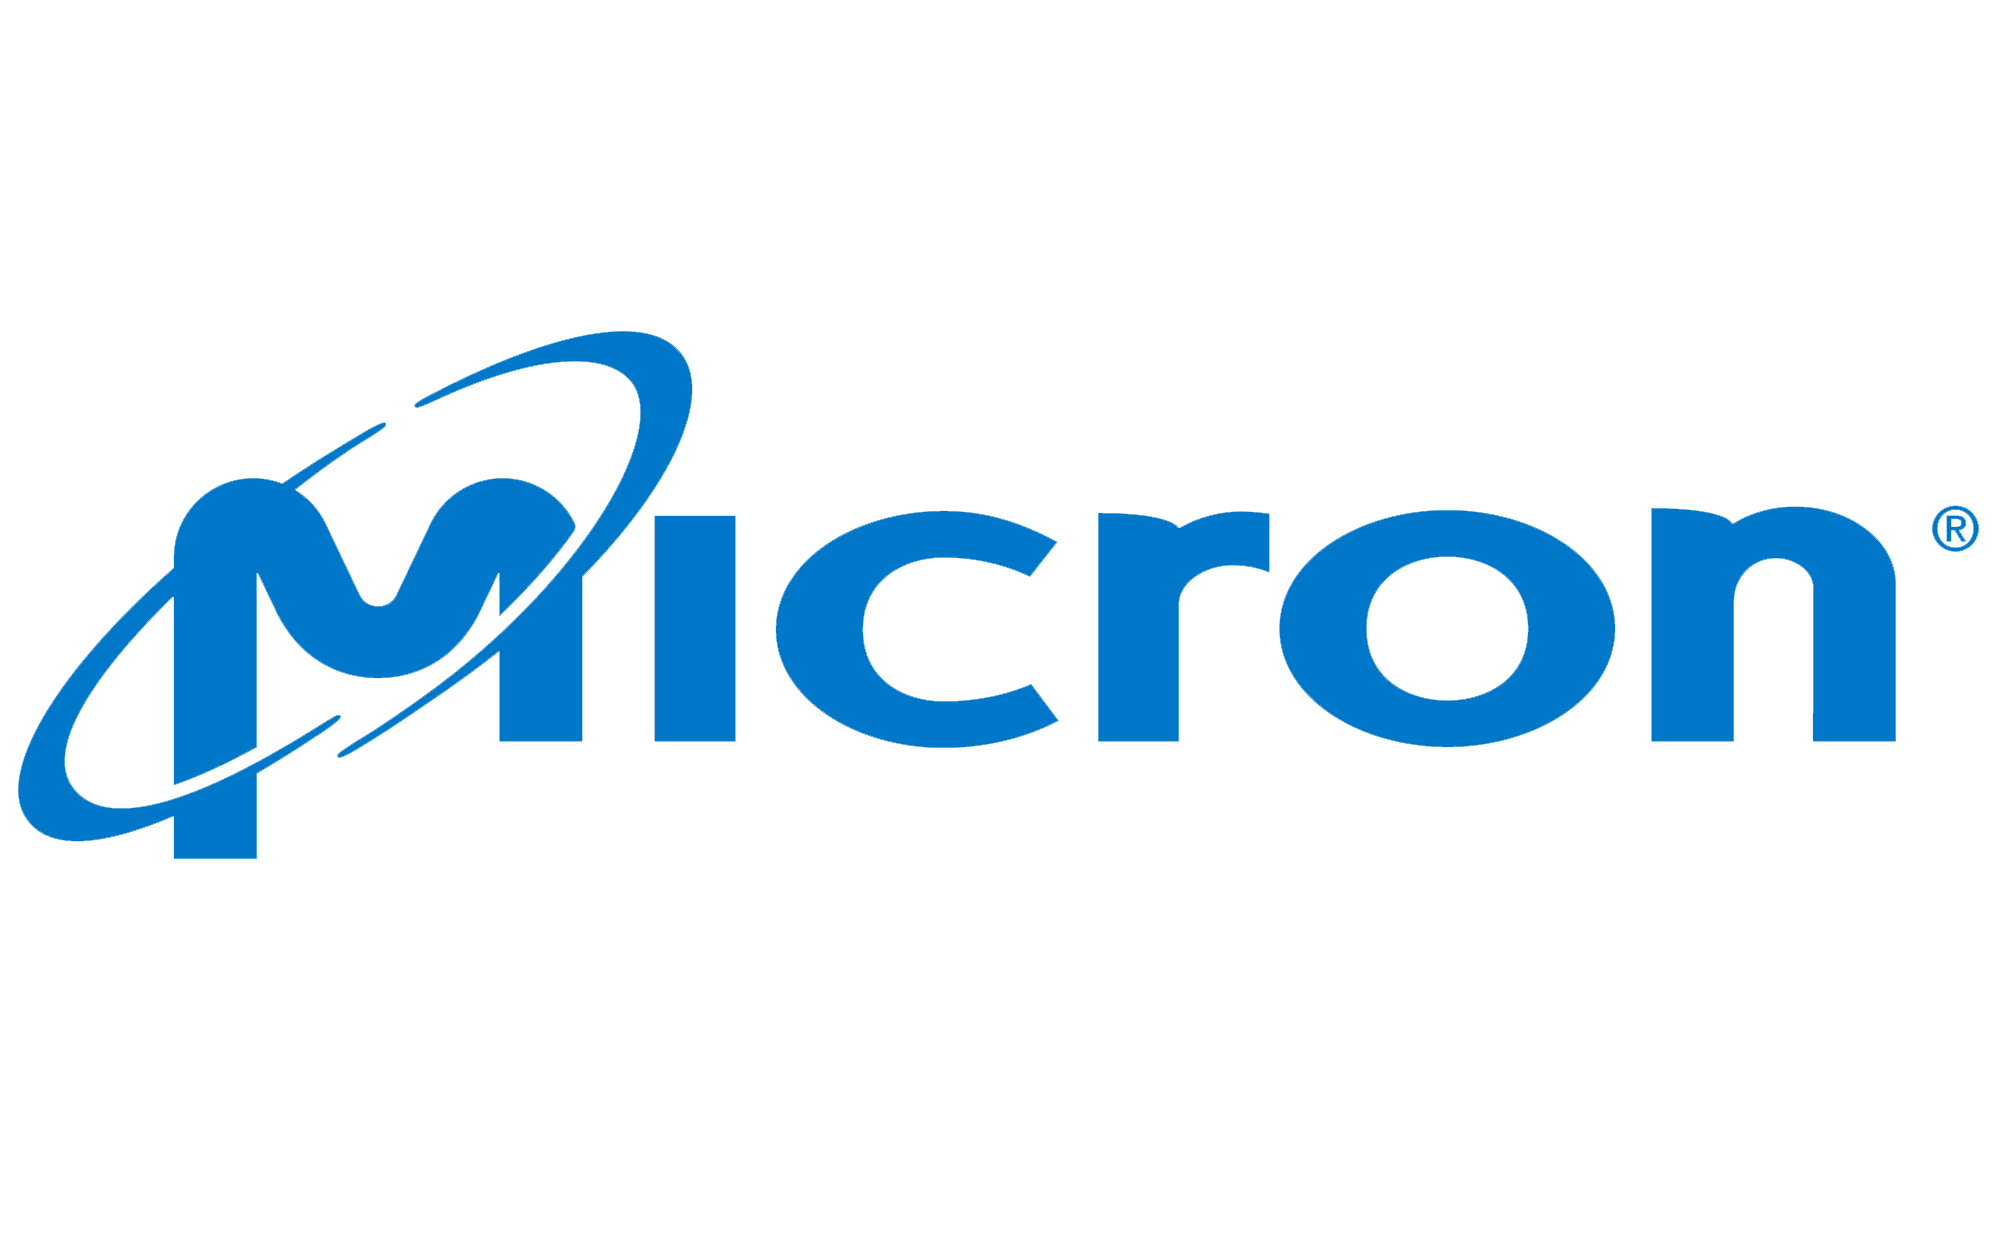 Micron Crucial 32GB (16GBx2 Kit) DDR5 Desktop Memory, PC5-38400, 4800MHz, Unranked, Life WTY